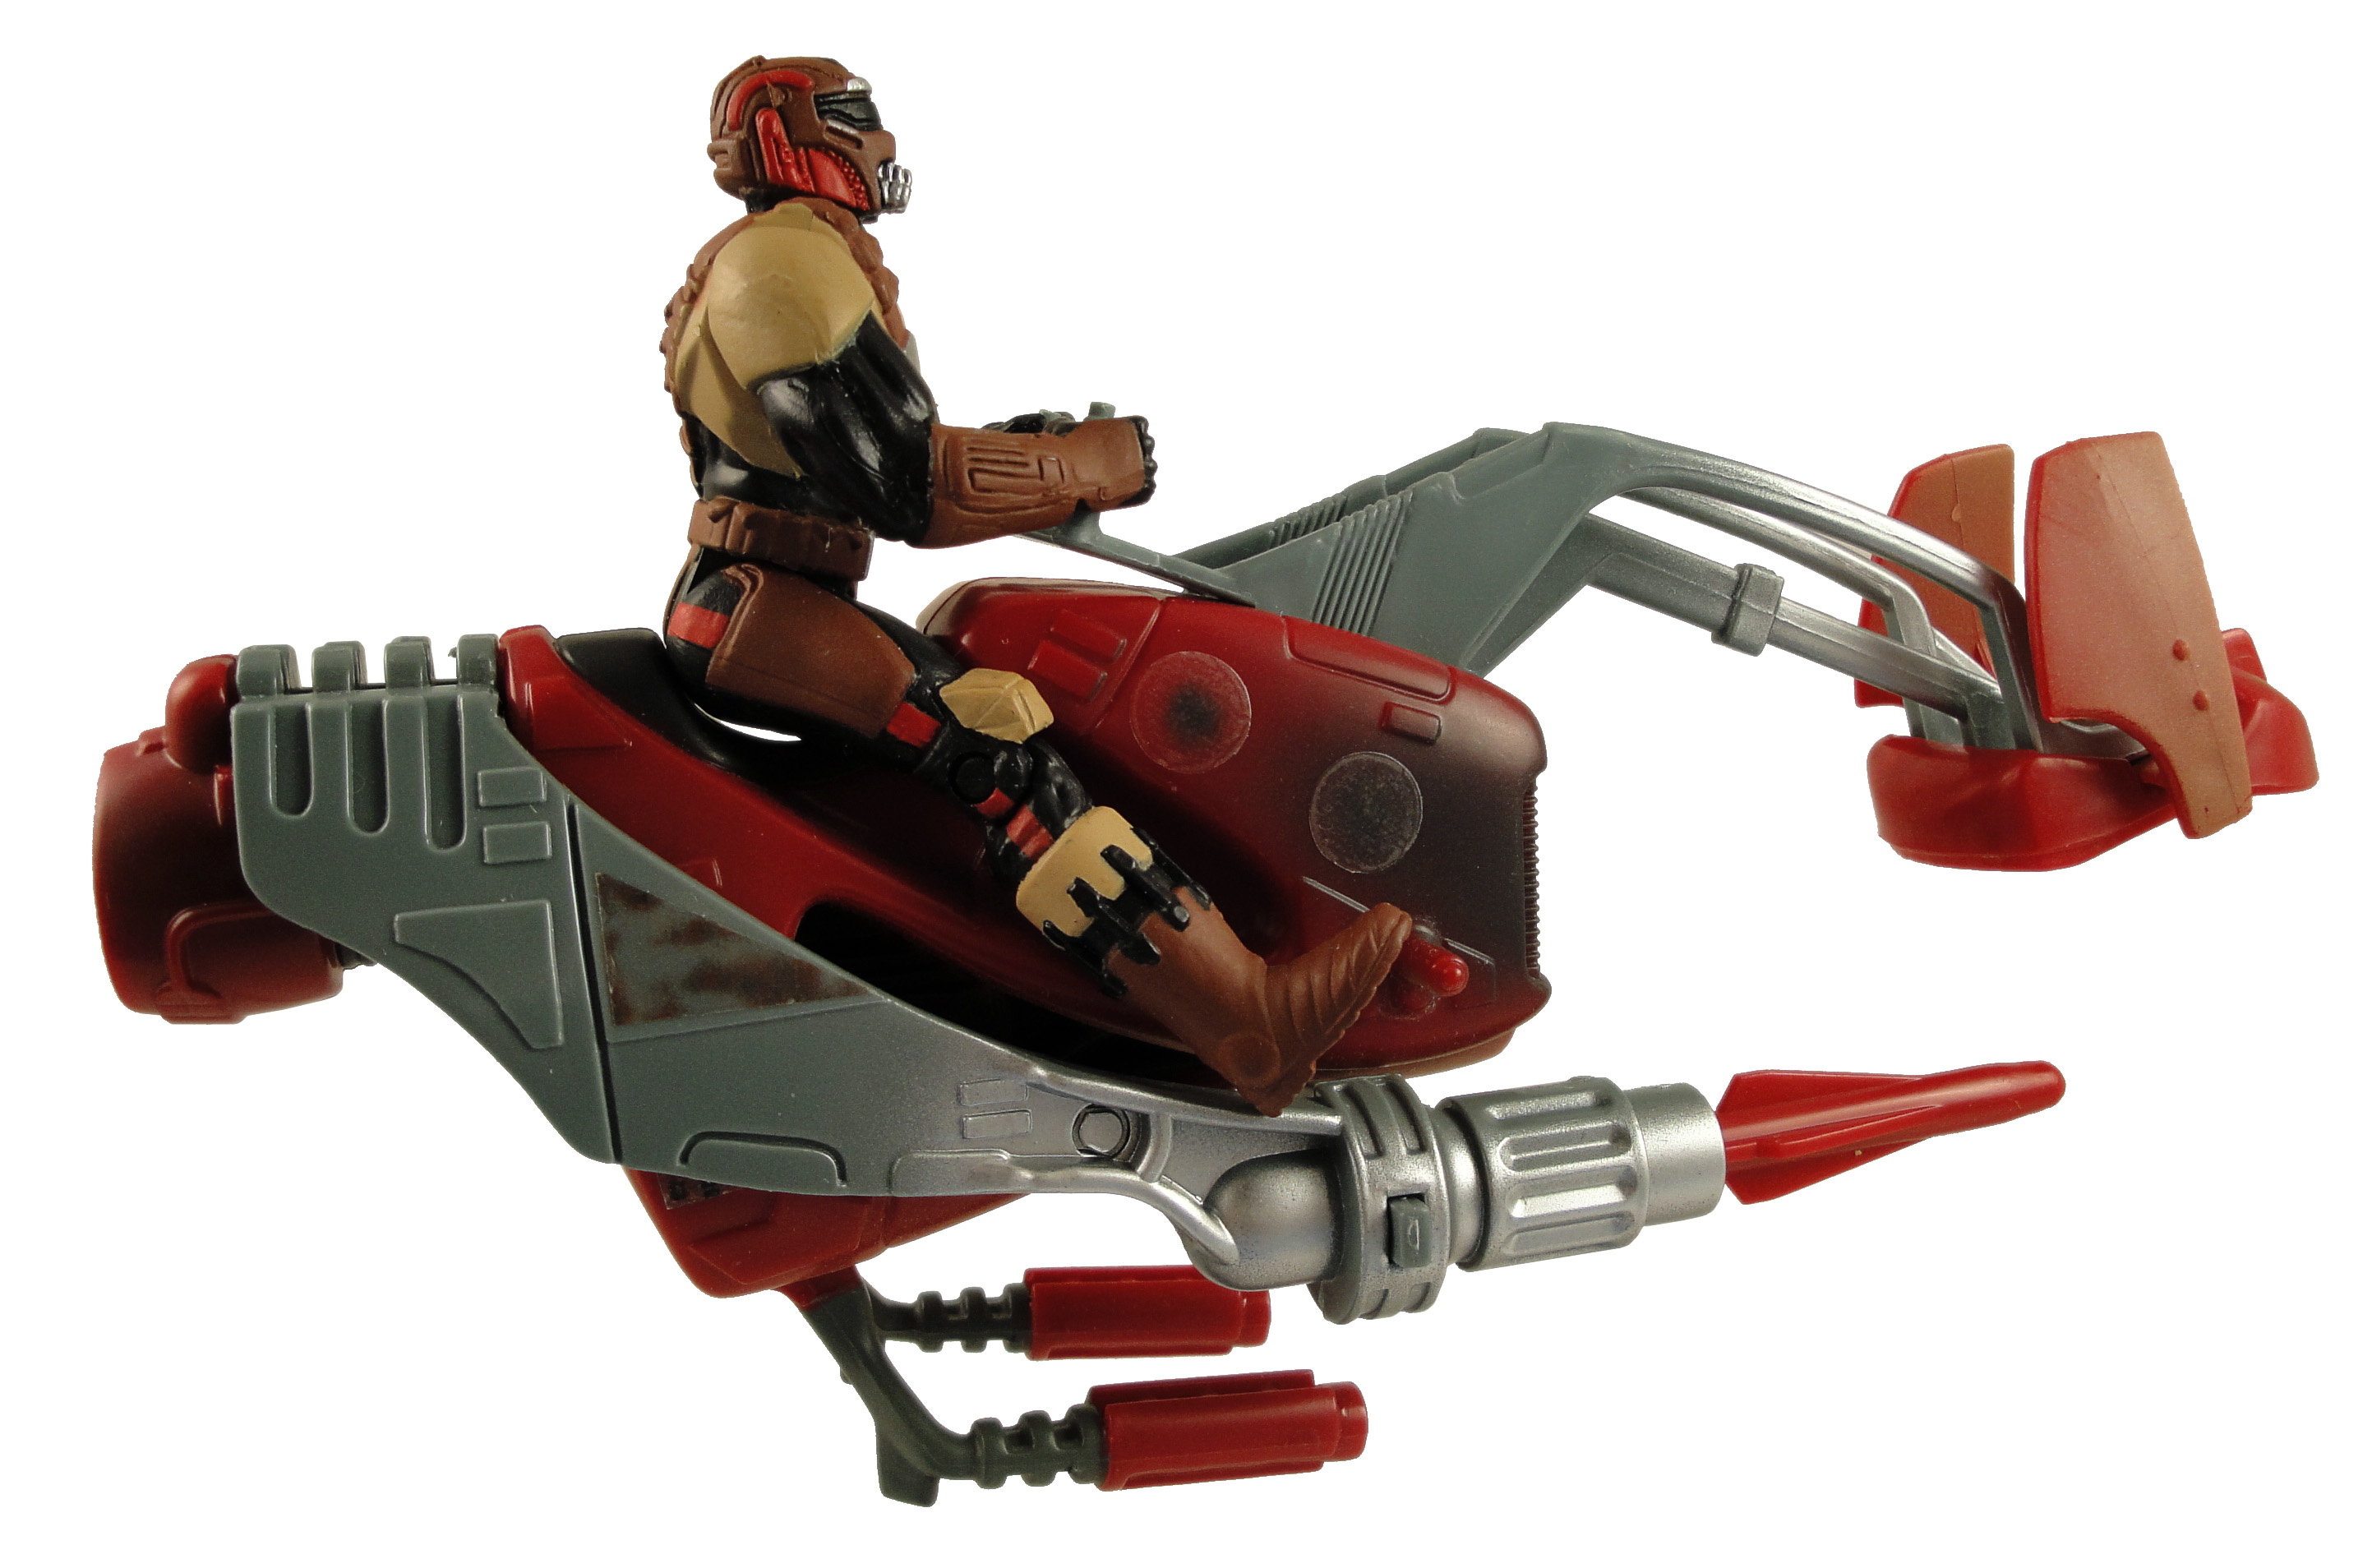 Review – Star Wars: Shadows of the Empire Swoop with Swoop Trooper